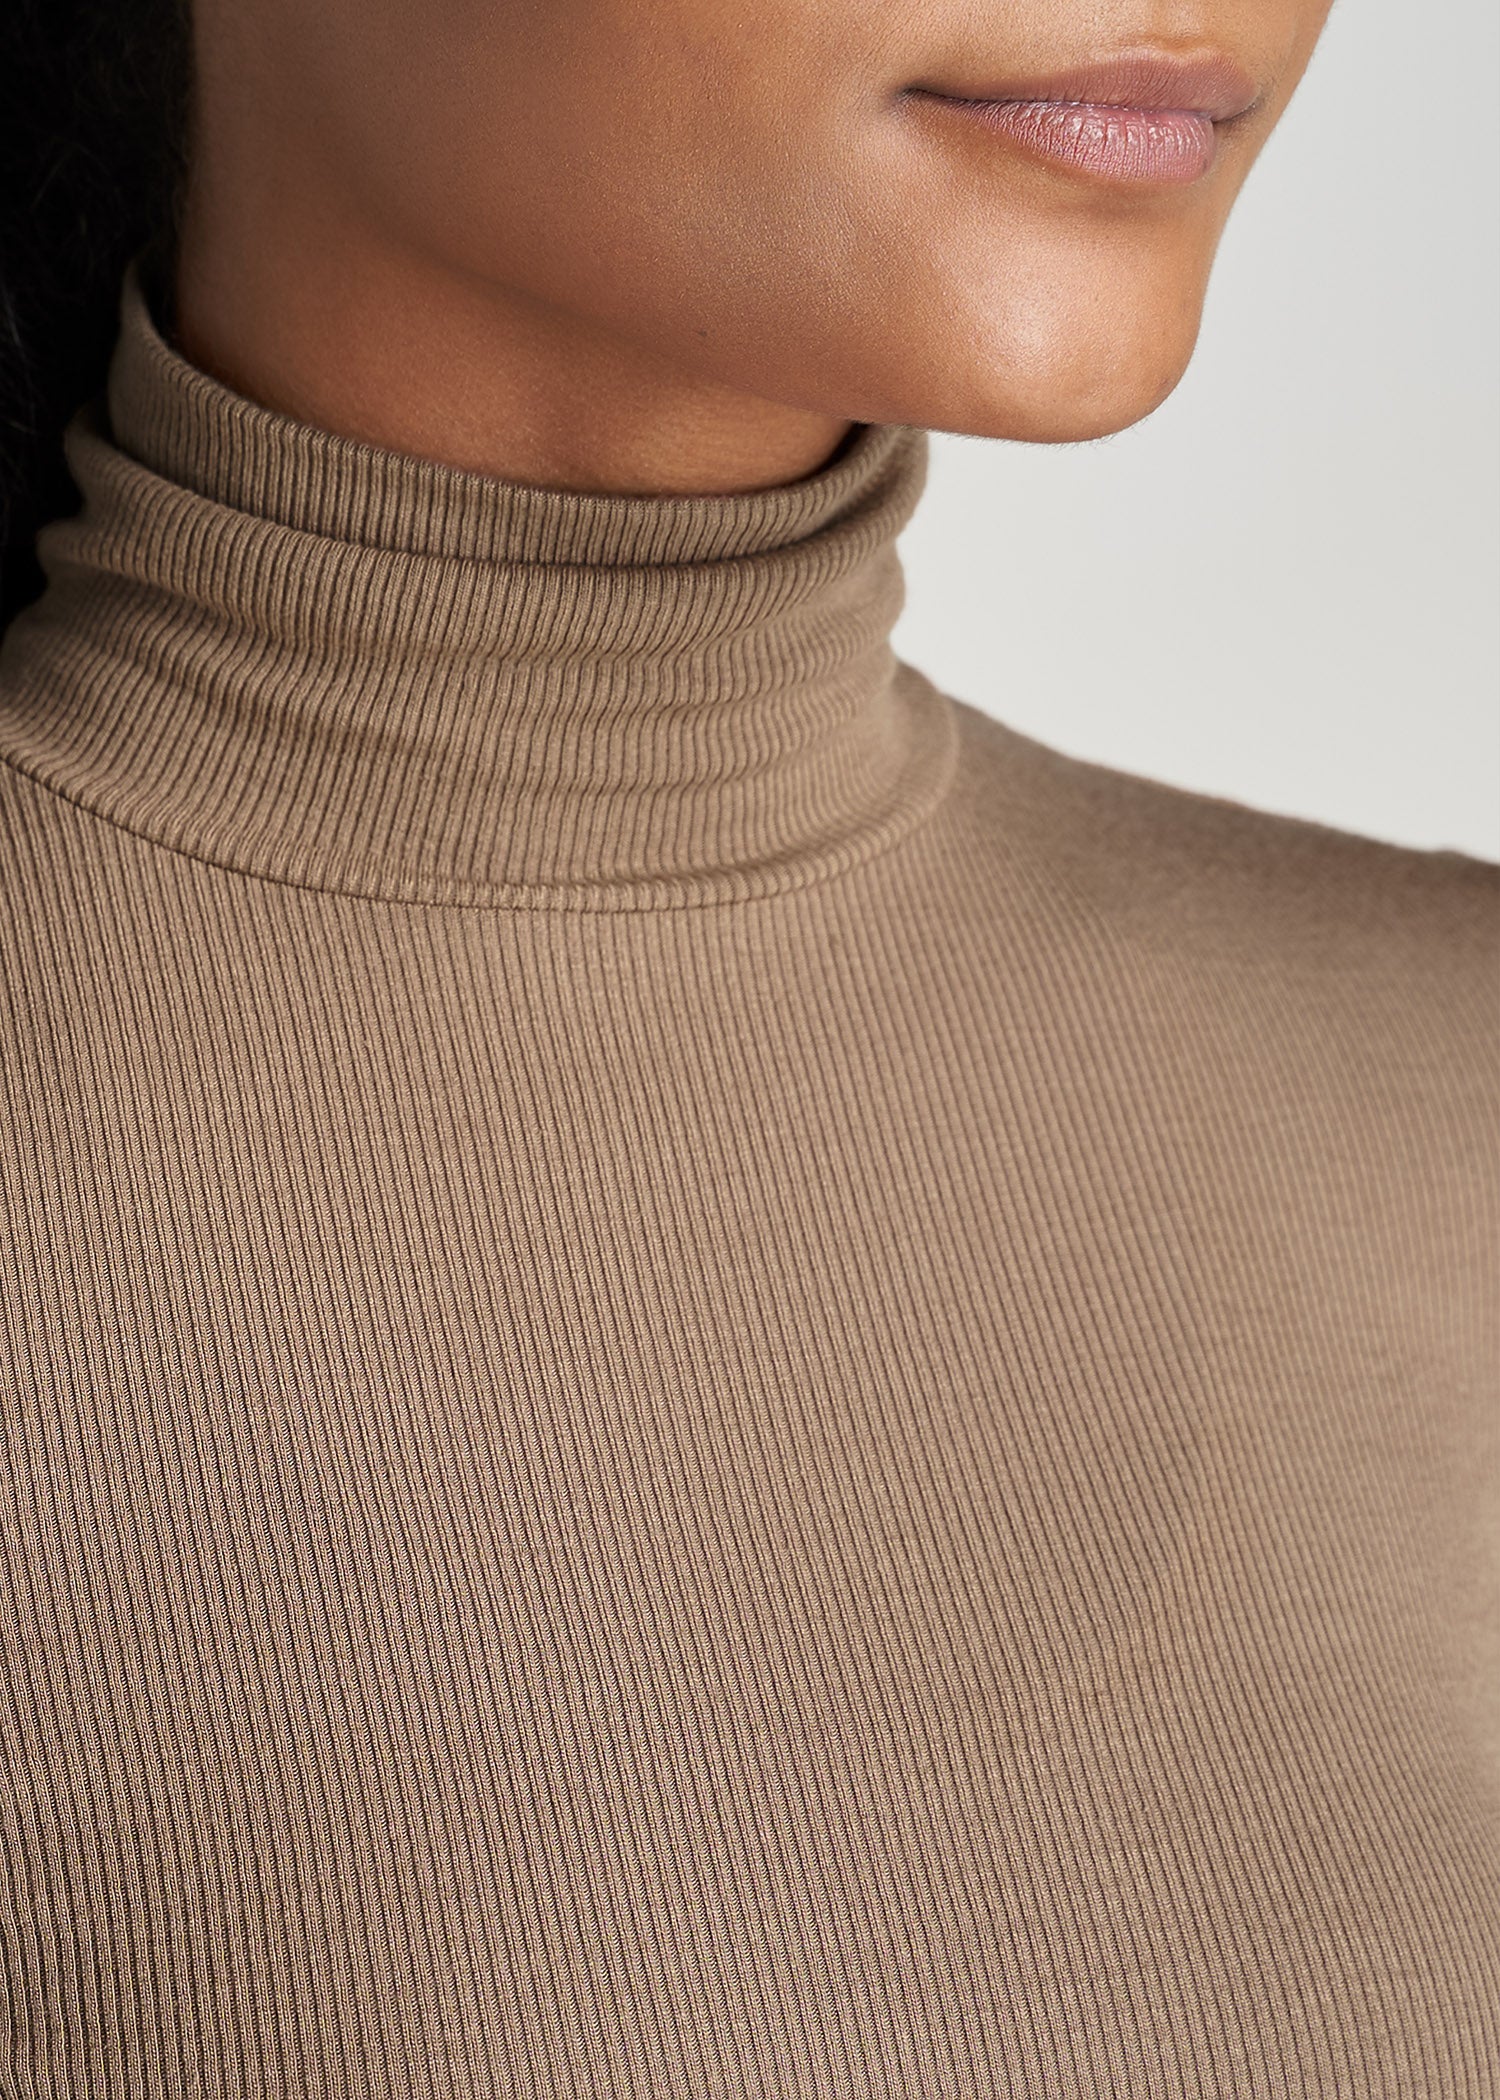     American-Tall-Women-Fitted-LongSleeve-Ribbed-TurtleNeck-Latte-detail